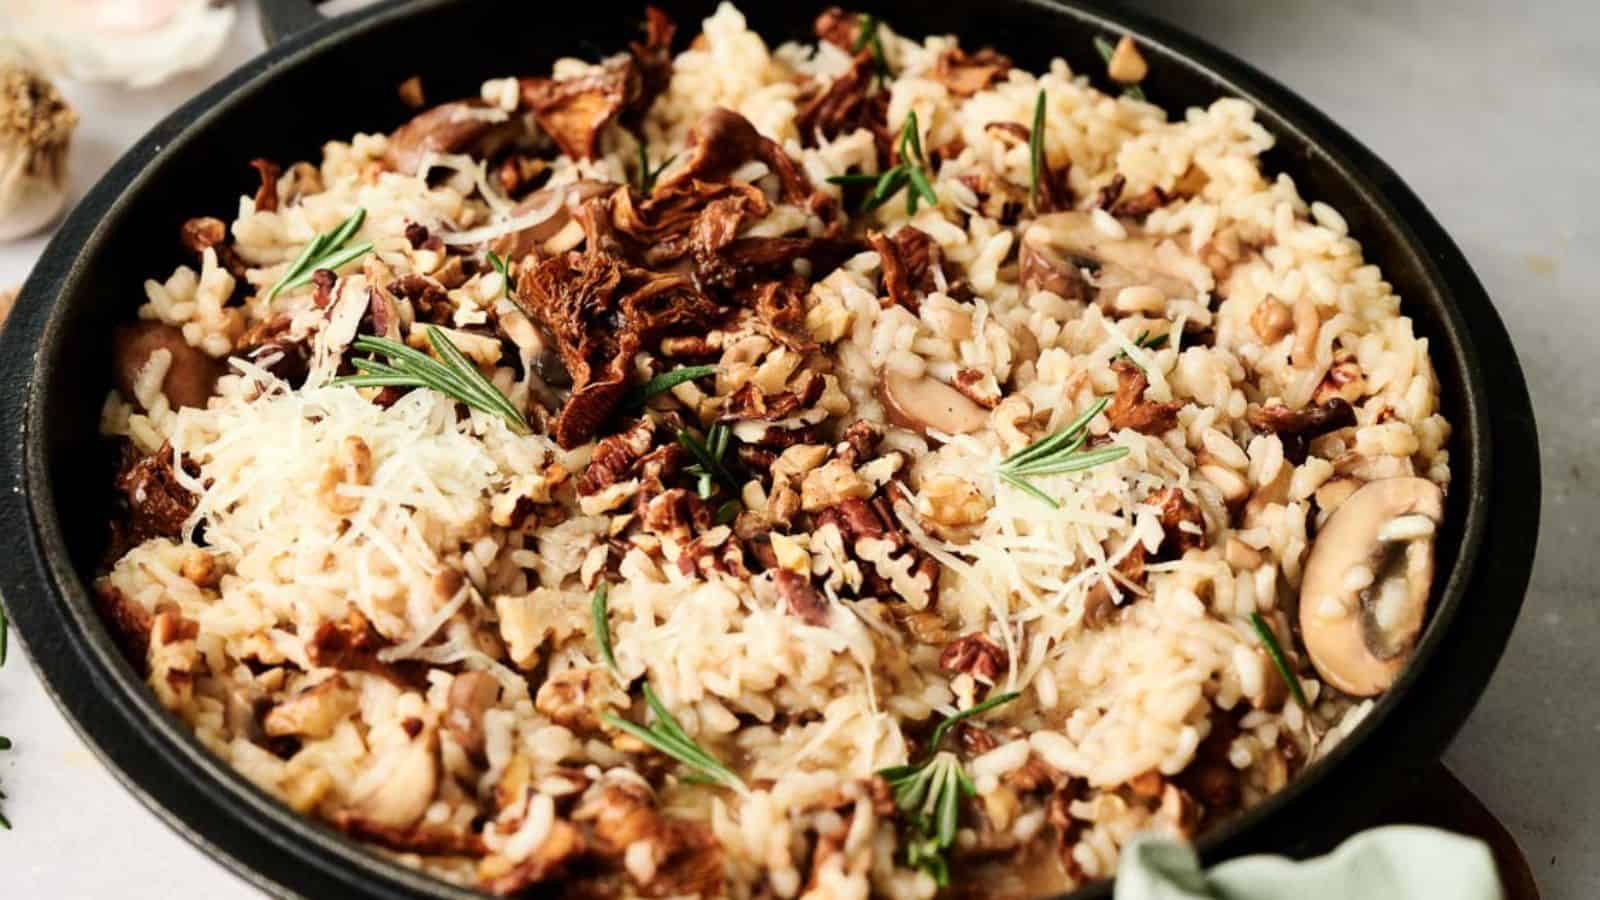 A bowl of risotto with mushrooms and parmesan cheese.